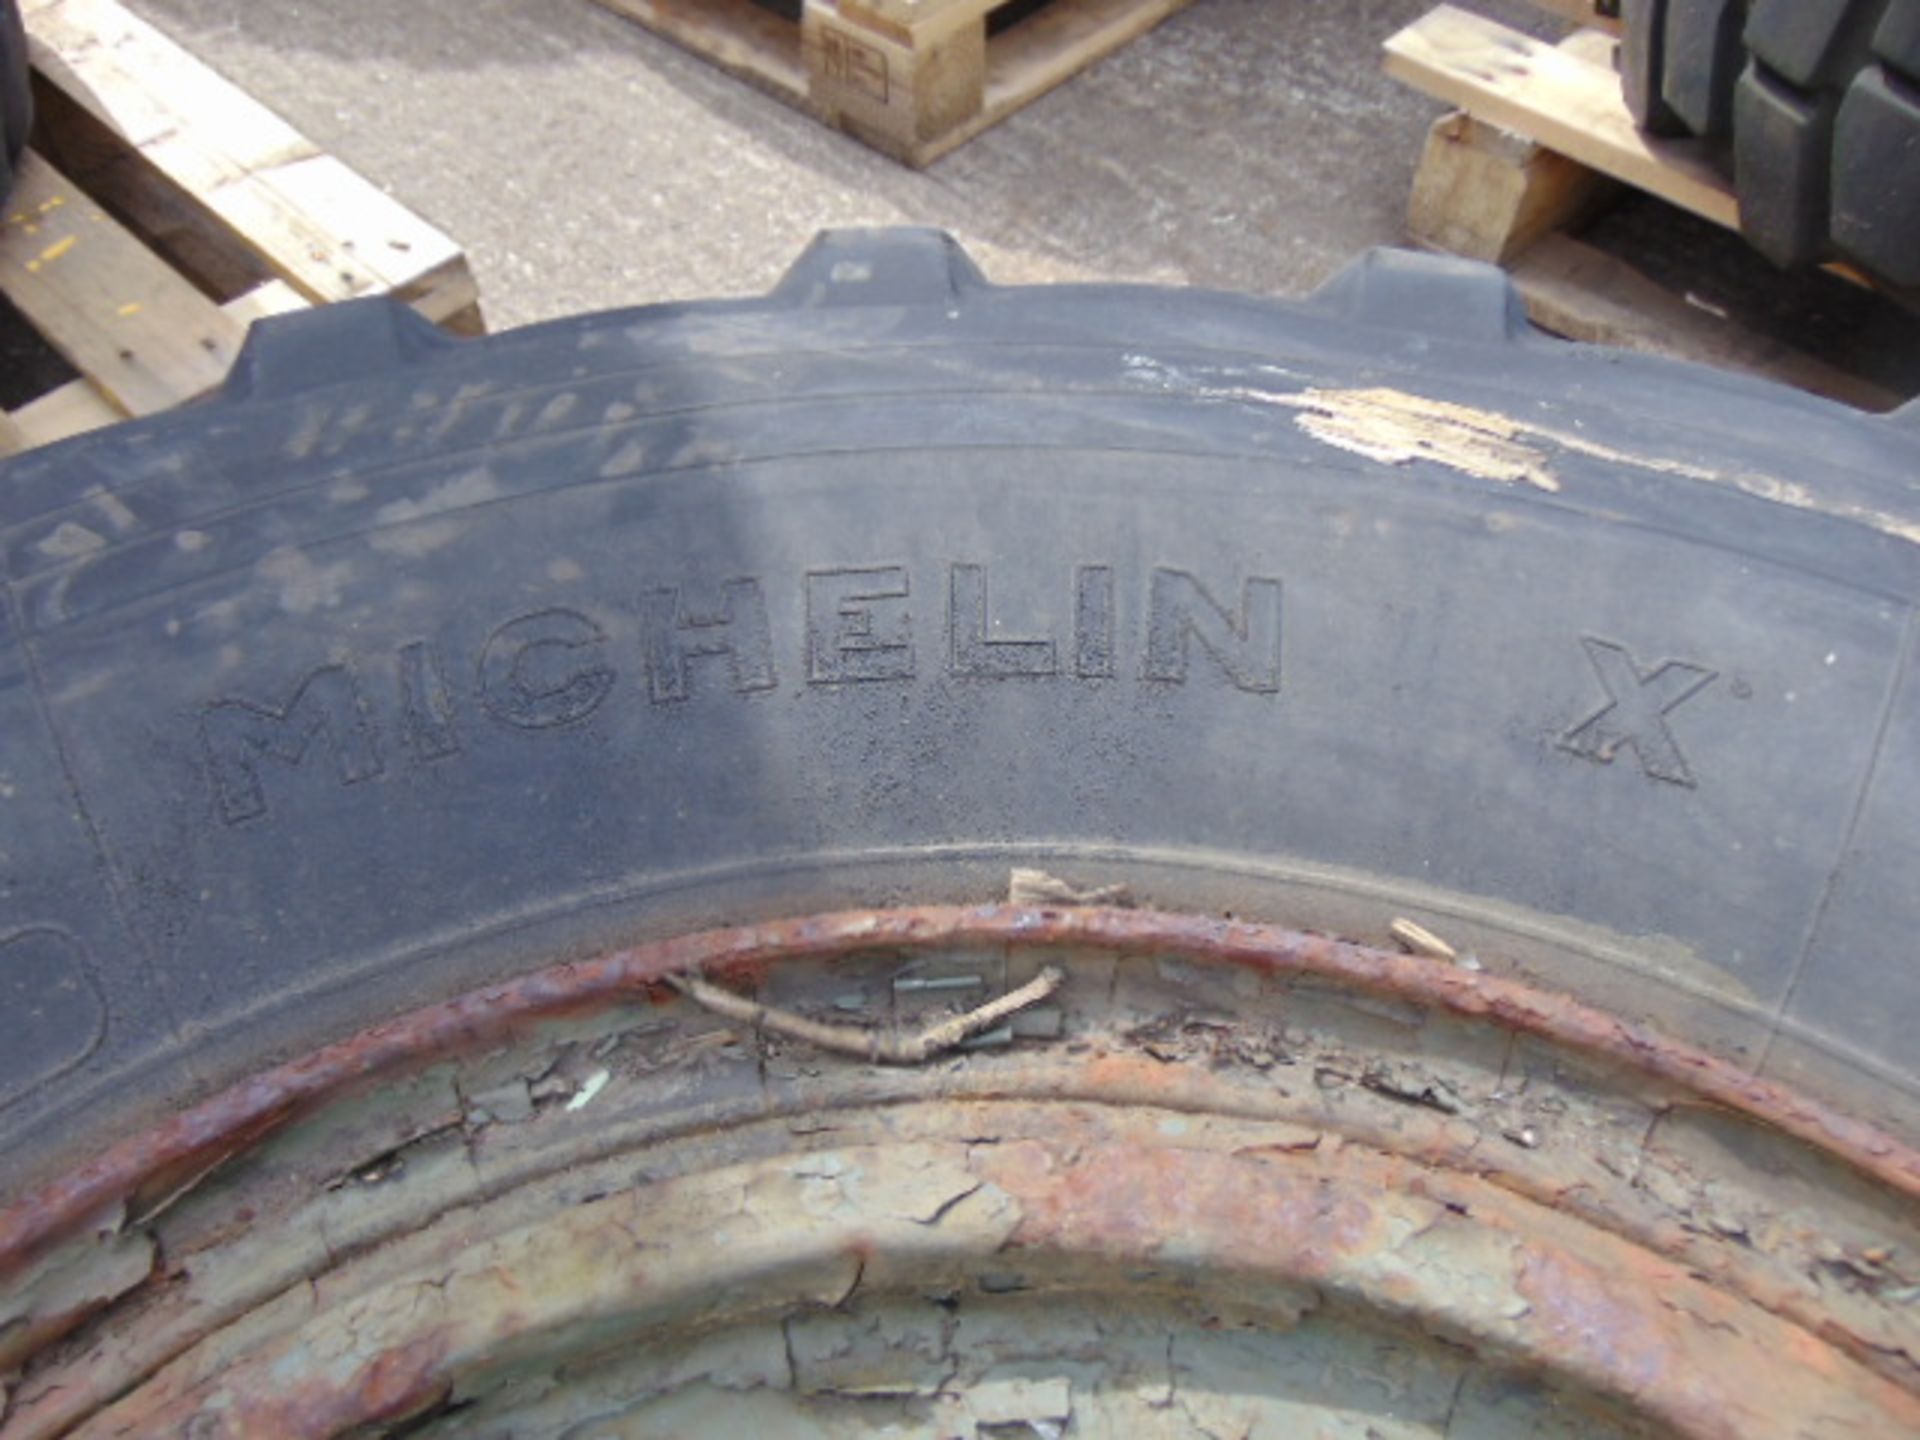 1 x Michelin 13.00 R20 Pilote XL Tyre on 10 stud Rim - Image 4 of 5